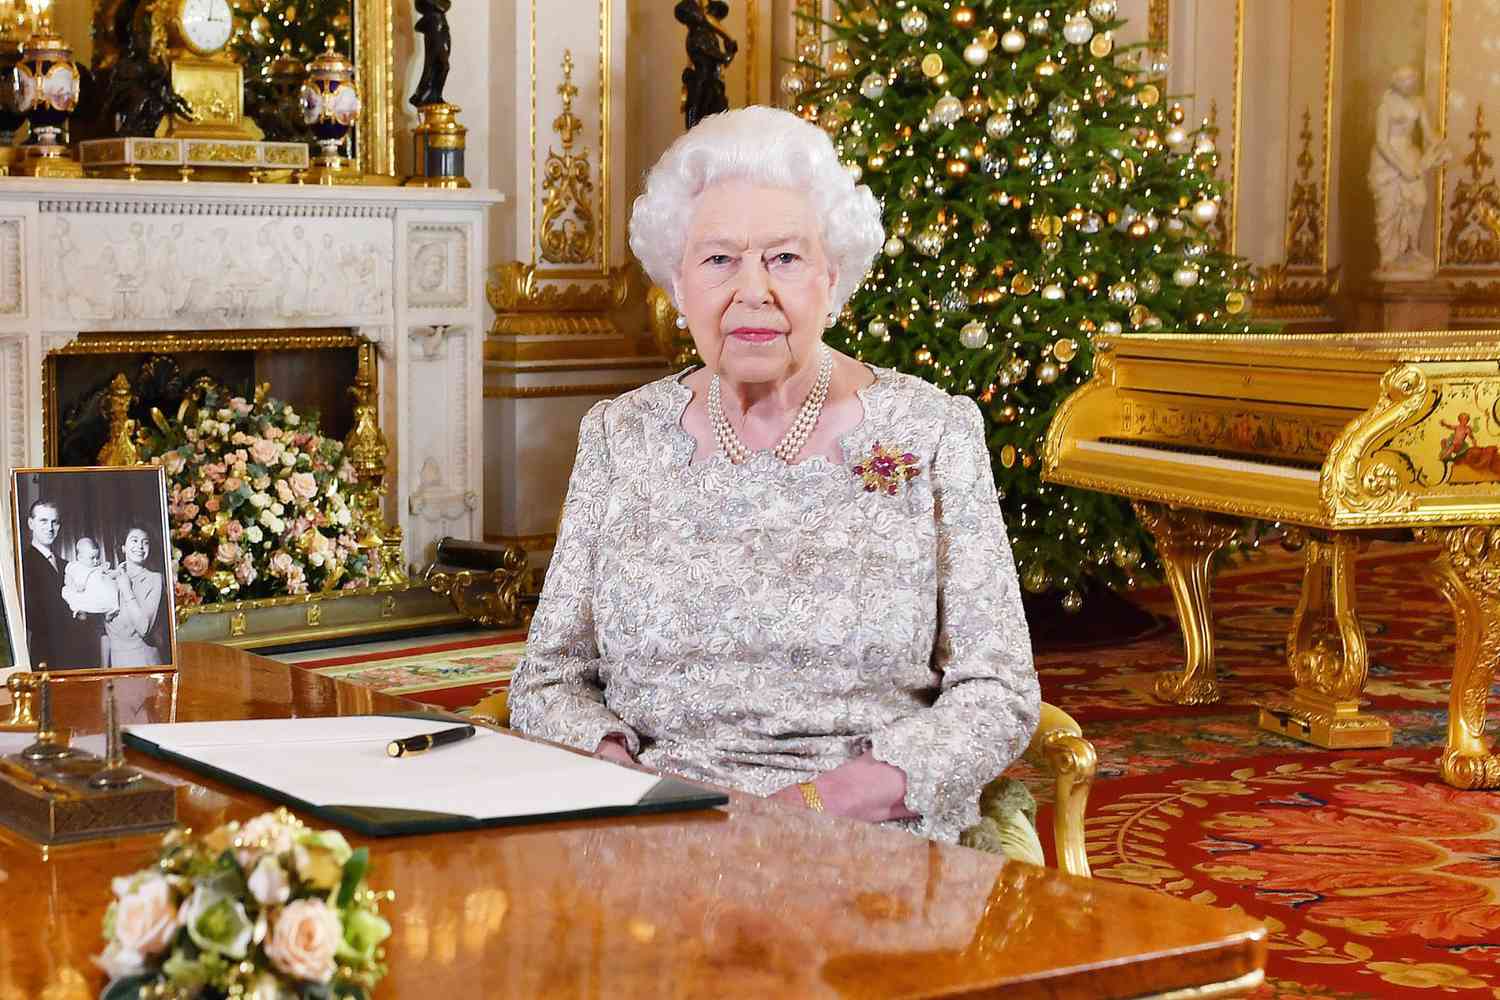 Queen Elizabeth Is 'Accepting' That Christmas Will Be Without Usual Family Festivities This Year